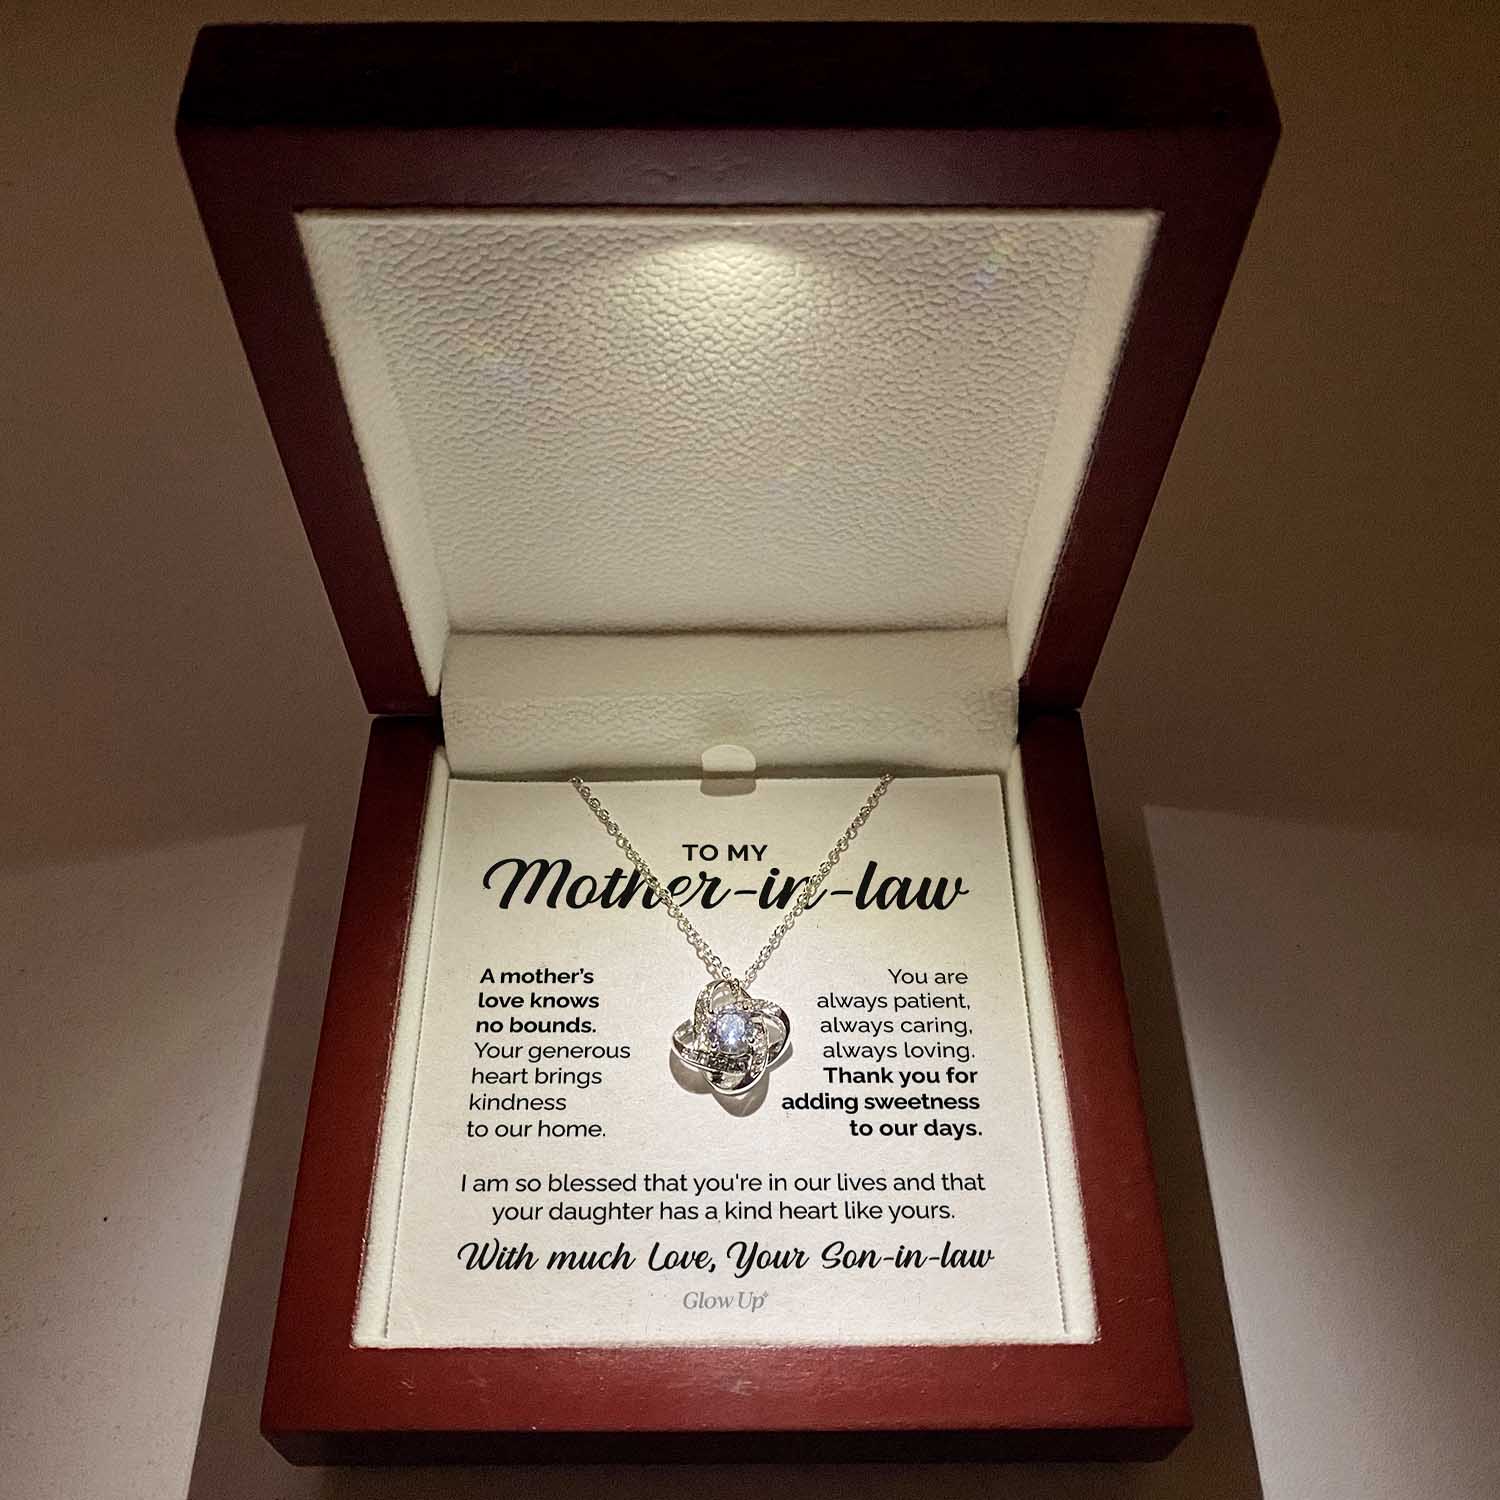 ShineOn Fulfillment Jewelry Mahogany Style Luxury Box (w/LED) To my Mother-in-law - A mother's love knows no bounds - Love Knot Necklace